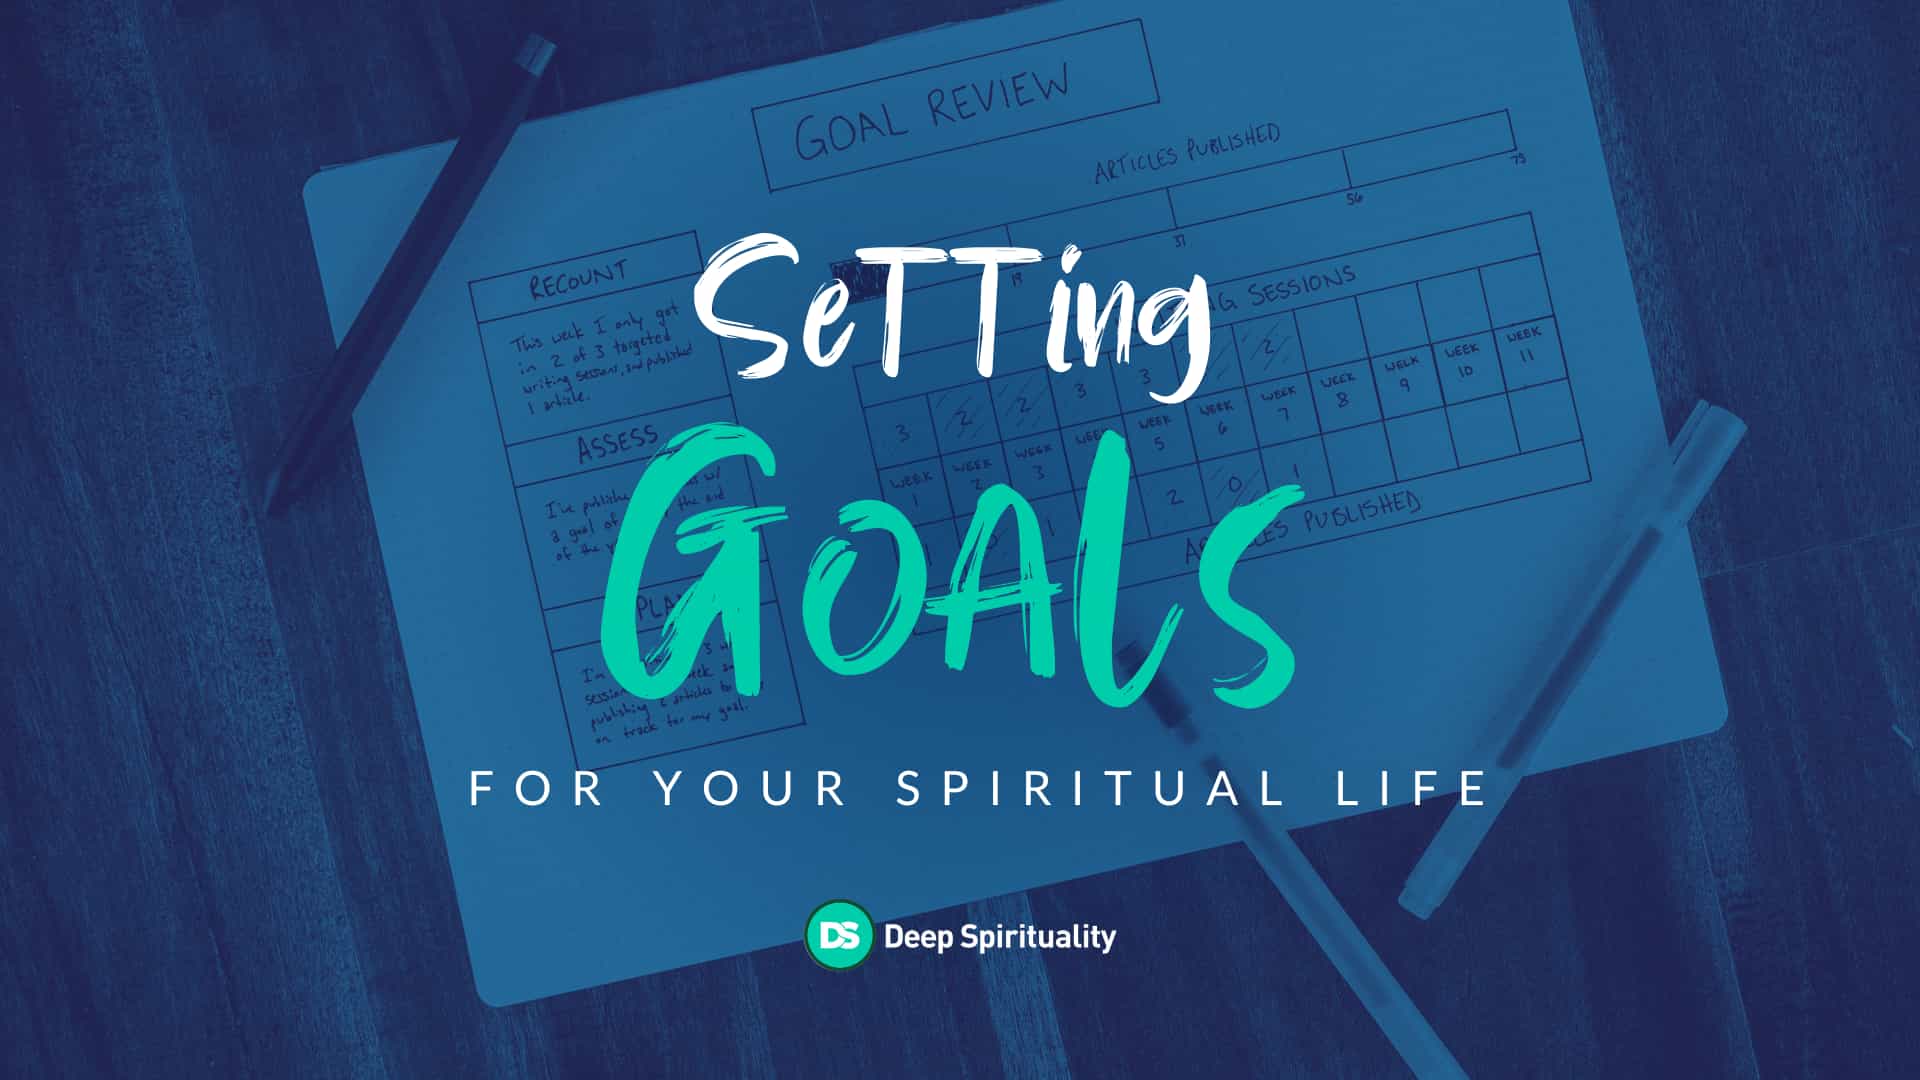 How to Set Goals for Your Spiritual Life 17